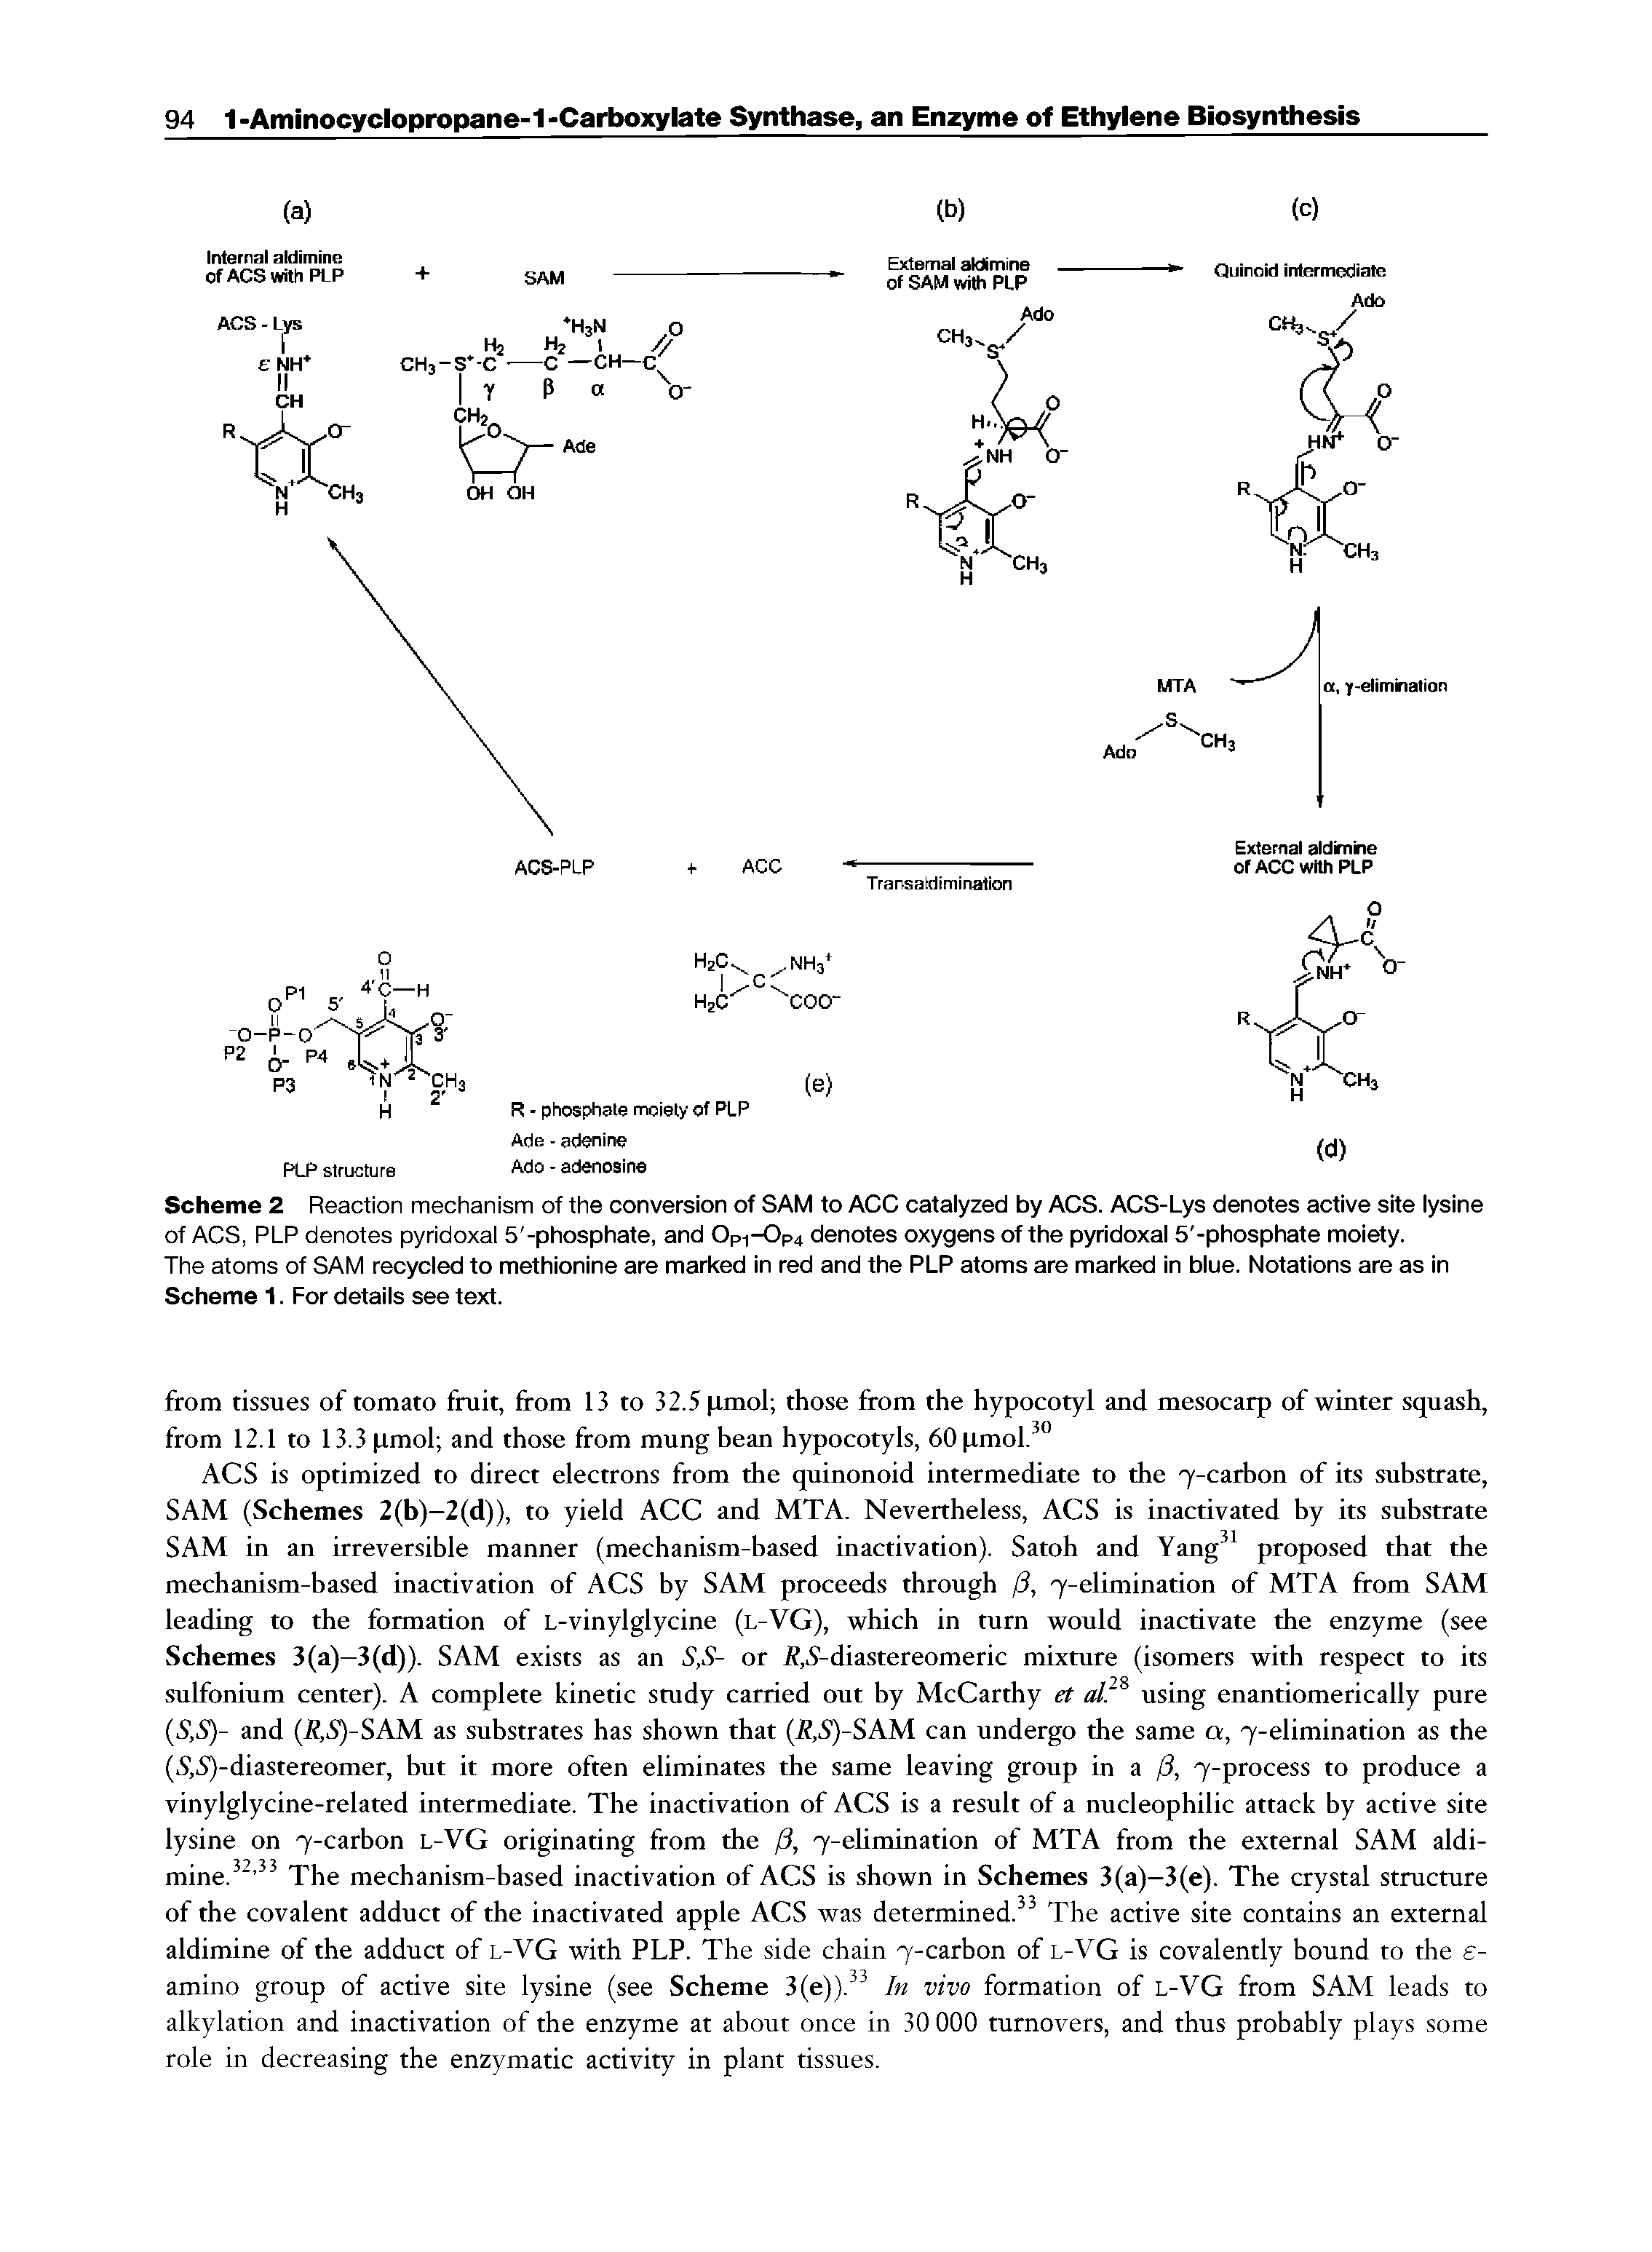 Scheme 2 Reaction mechanism of the conversion of SAM to ACC catalyzed by ACS. ACS-Lys denotes active site lysine of ACS, PLP denotes pyridoxai 5 -phosphate, and Opi-Op4 denotes oxygens of the pyridoxal 5 -phosphate moiety.